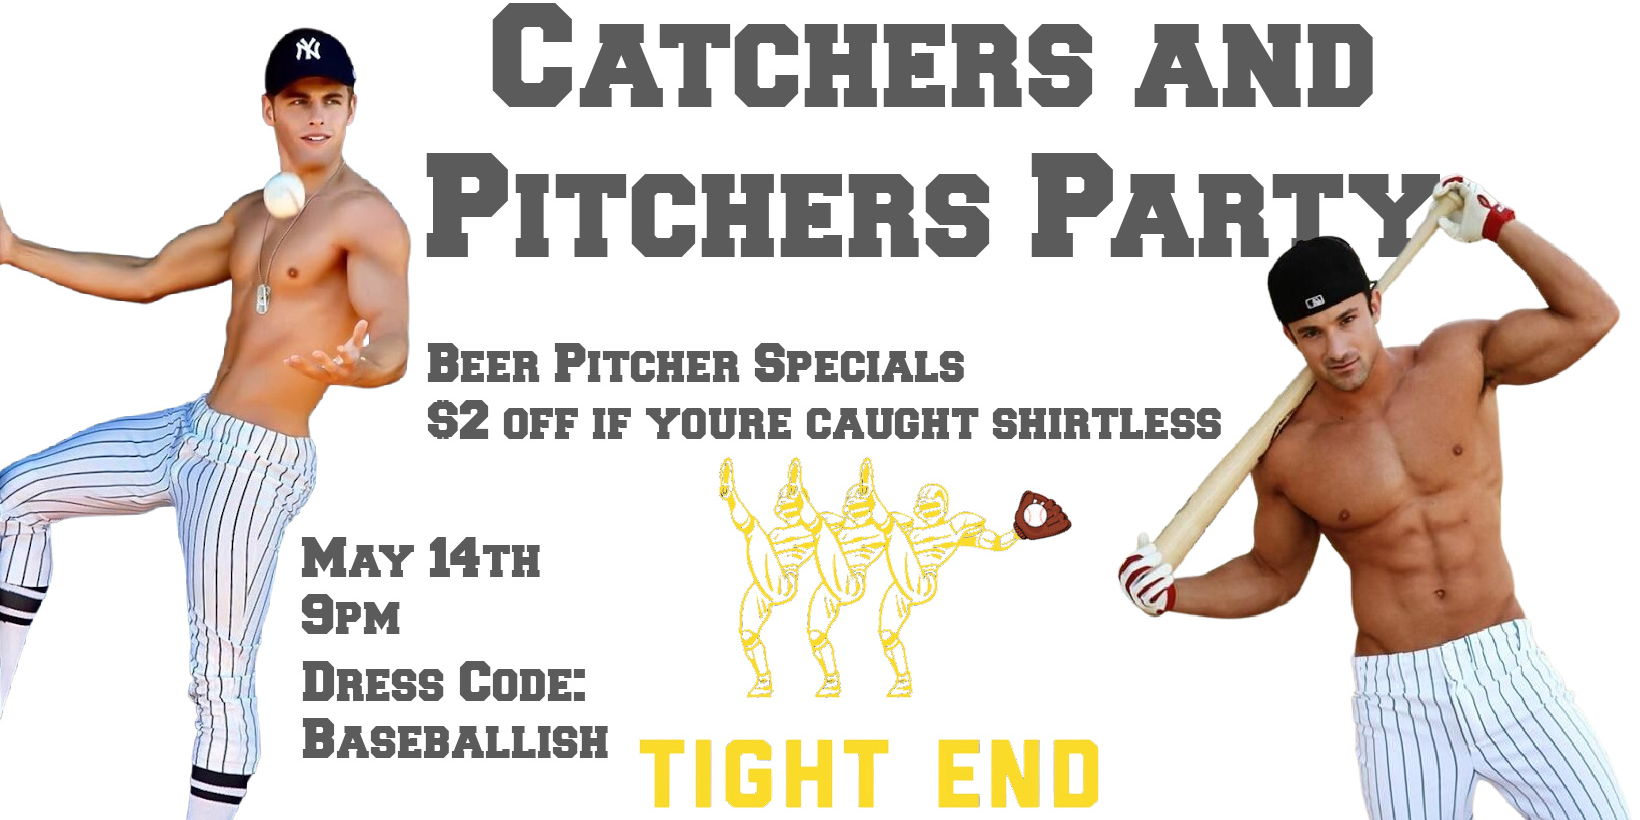 Catchers and Pitchers Party  promotional image